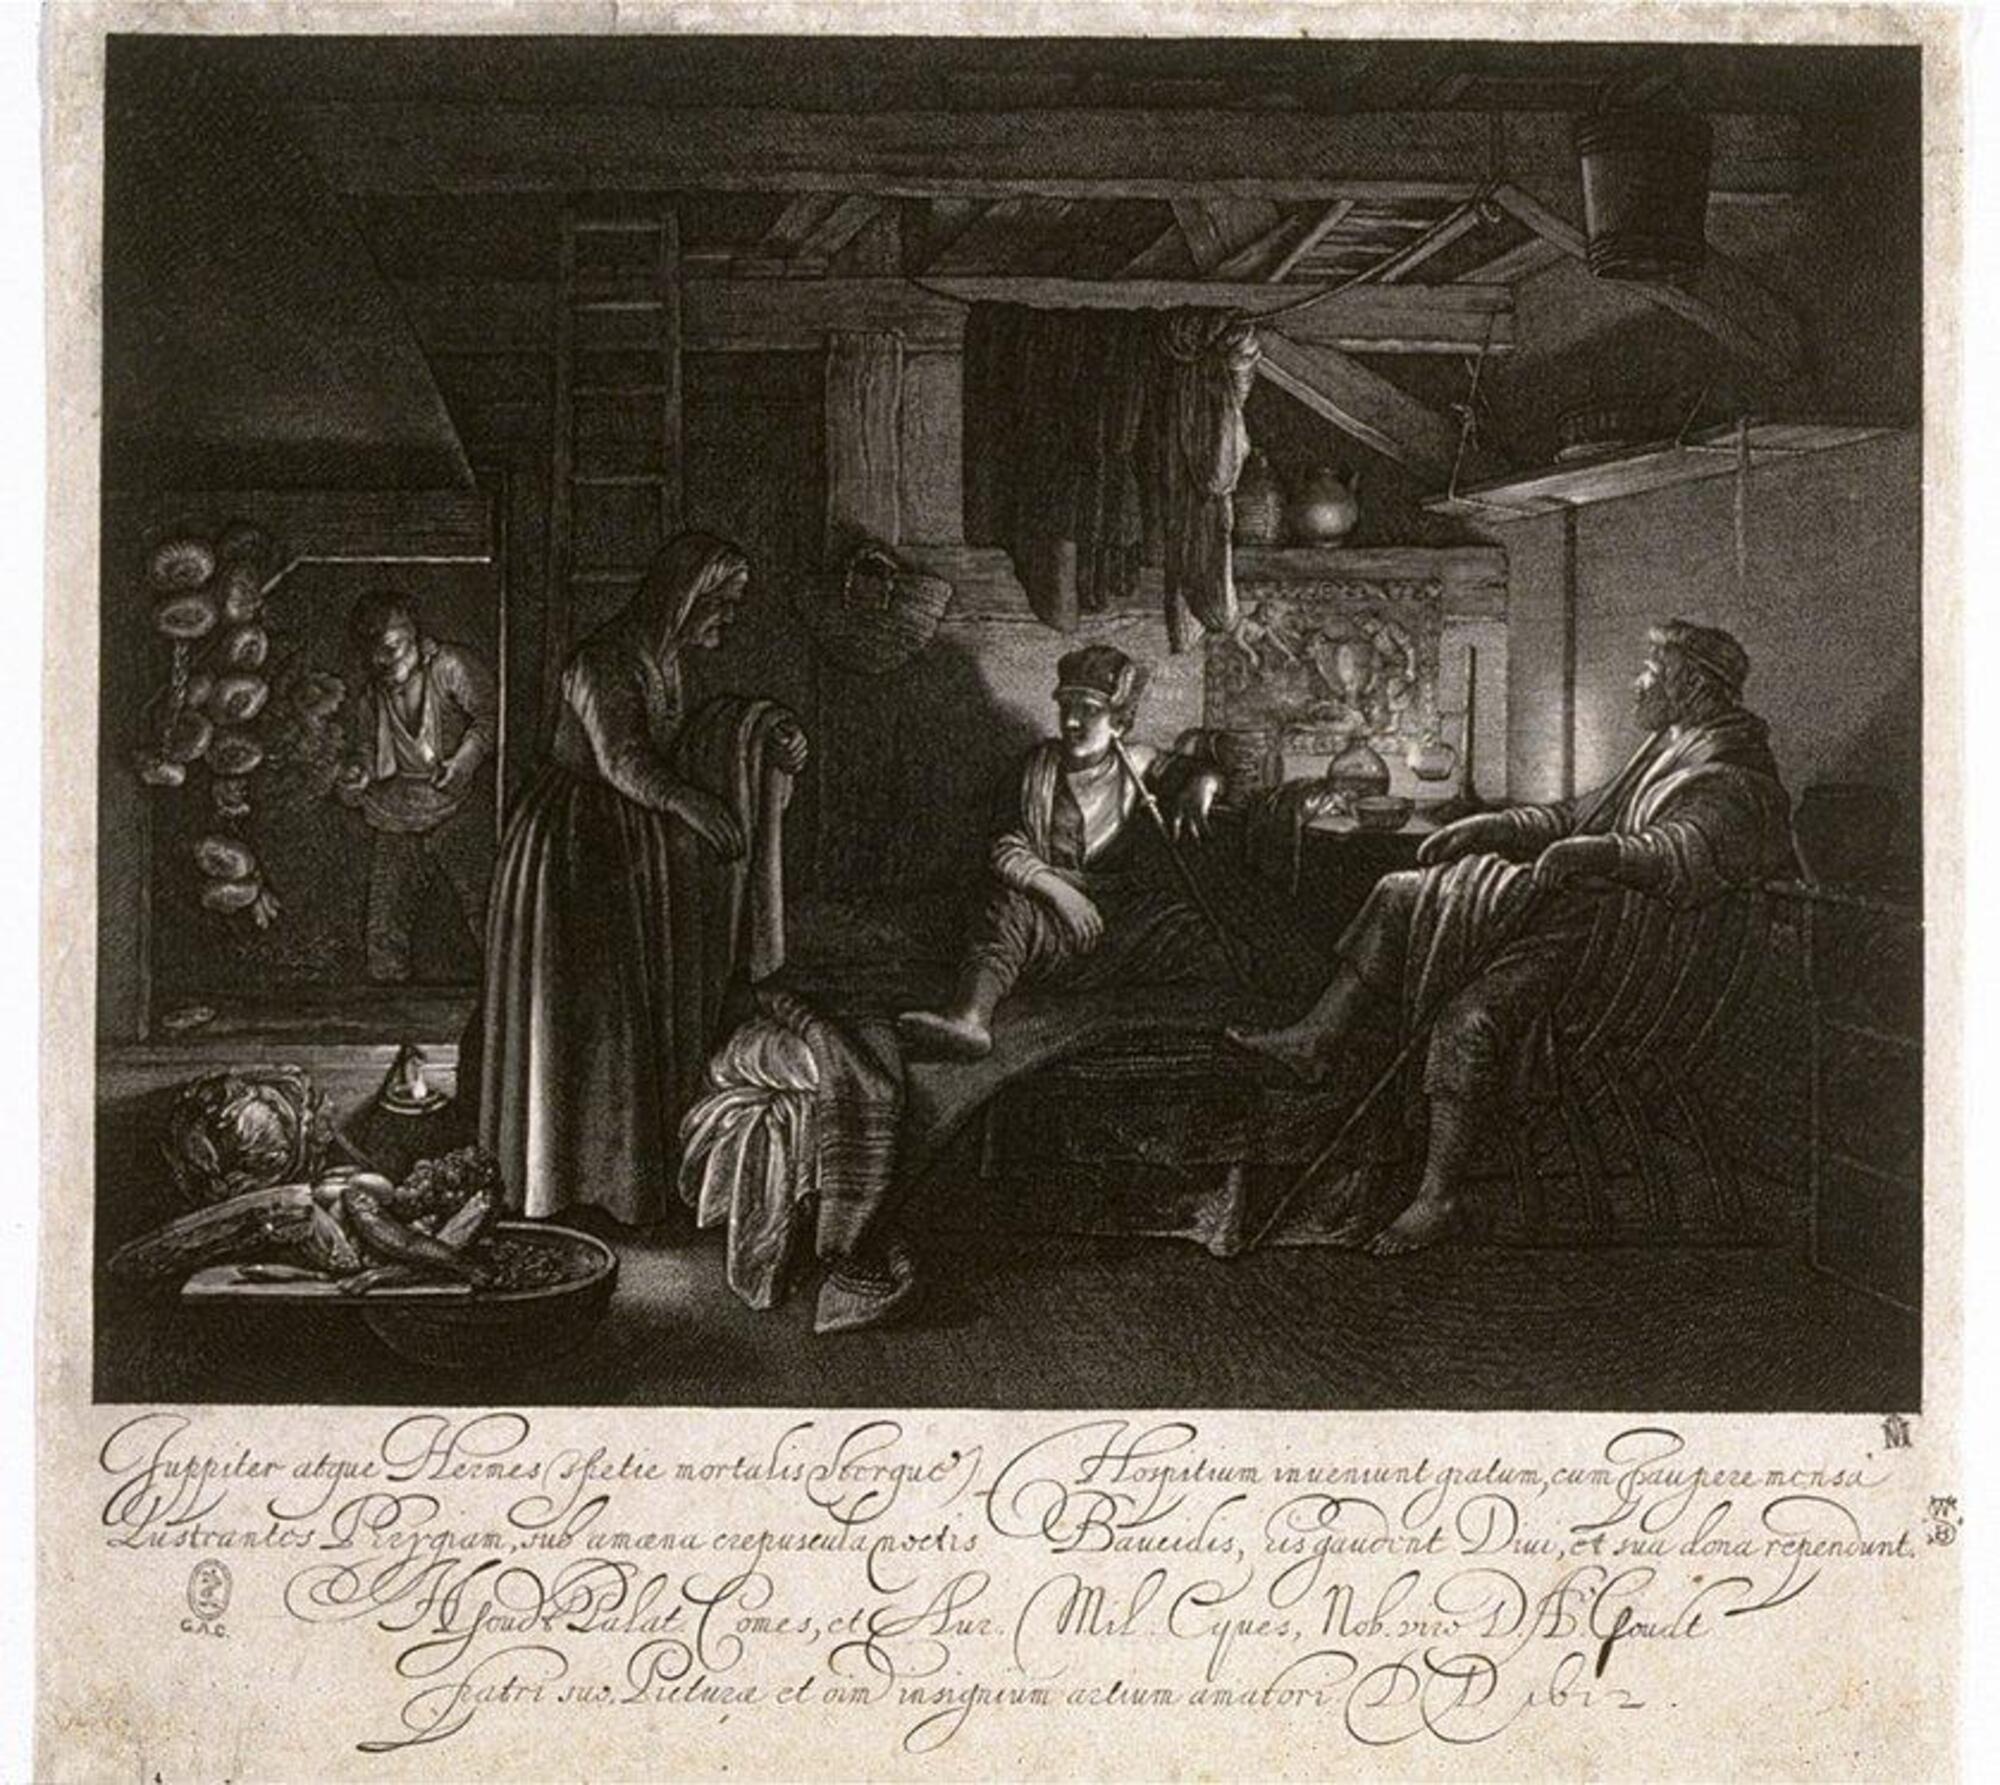 Two lamps provide the only source of light in this nighttime interior and the scene is full of dark shadows and areas highlighted by white. Two men are seated at a table- one is a bearded man wearing long robes and the other has a staff and a hat with wings. They are looking at a woman, wearing a cloth headdress and a long dress, who stands before them. On the left is a man entering through a doorway. The features of the room are shown in great detail including the assortment of food, hanging vegetables and baskets, a wall tapestry, the rough wood planking and decorative designs on the bedding. There is a printed Latin inscription below this scene.